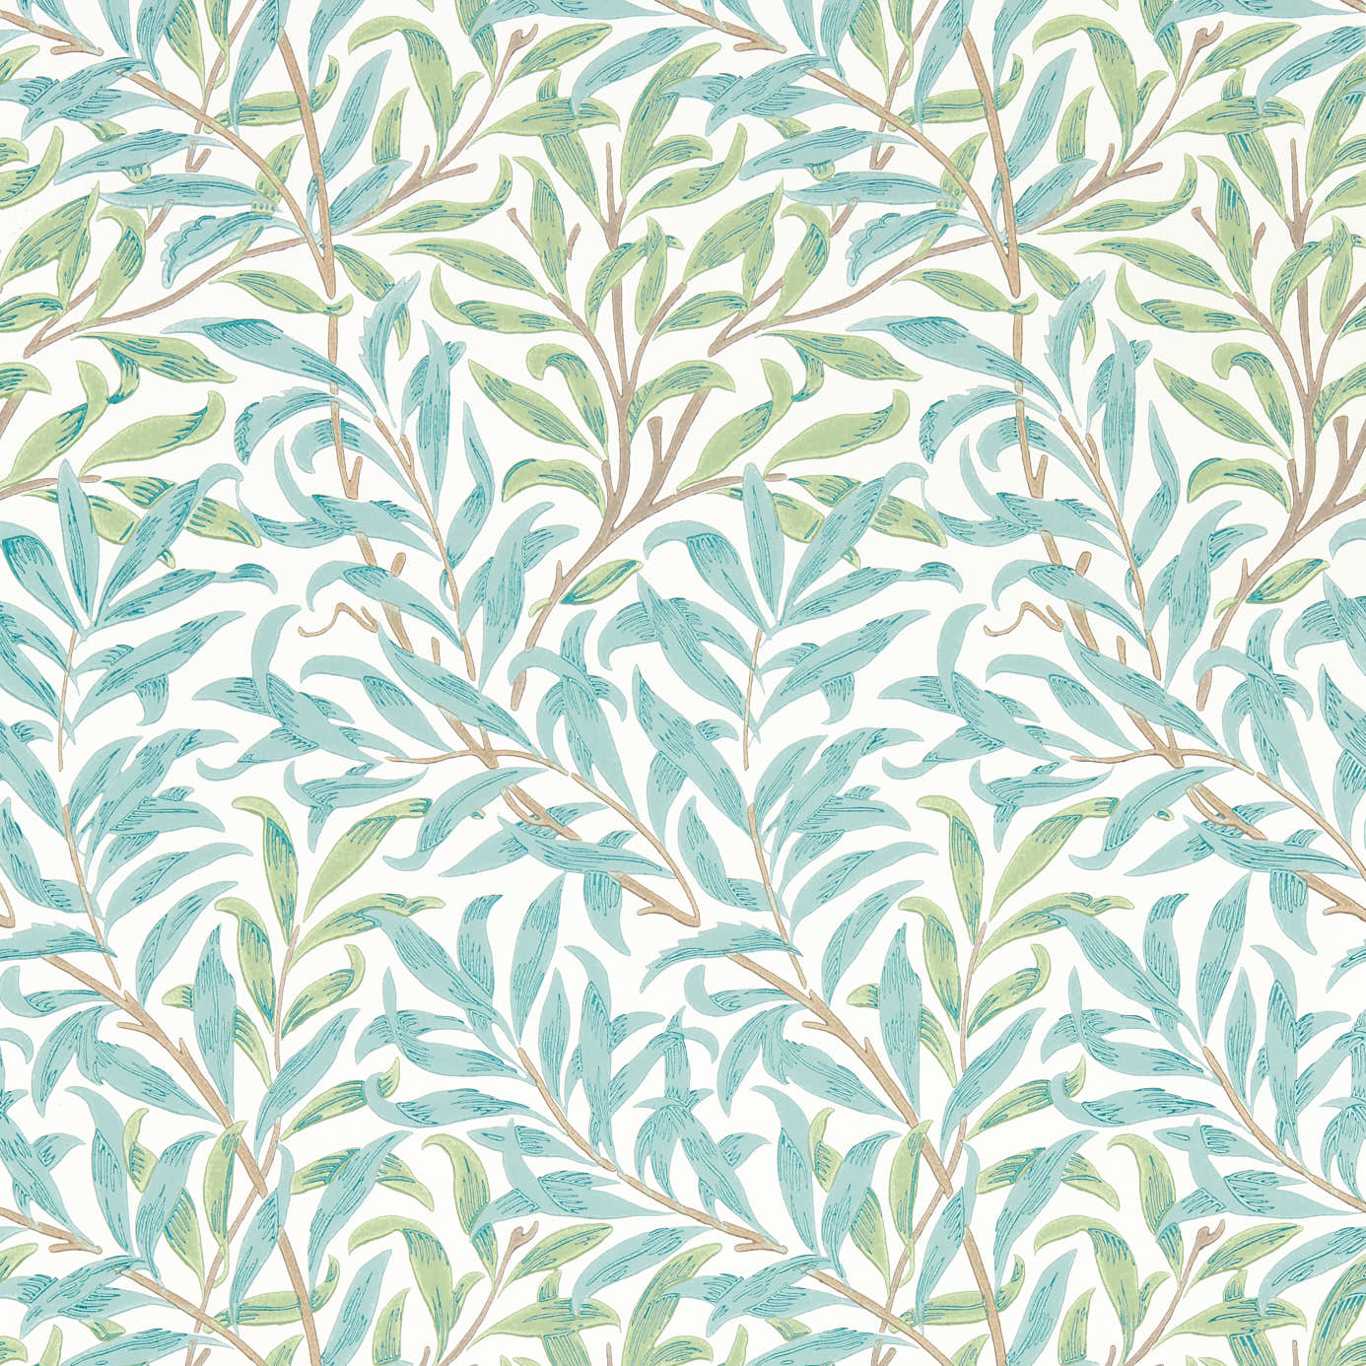 Willow Bough Willow/Seaglass Wallpaper MSIM217083 by Morris & Co